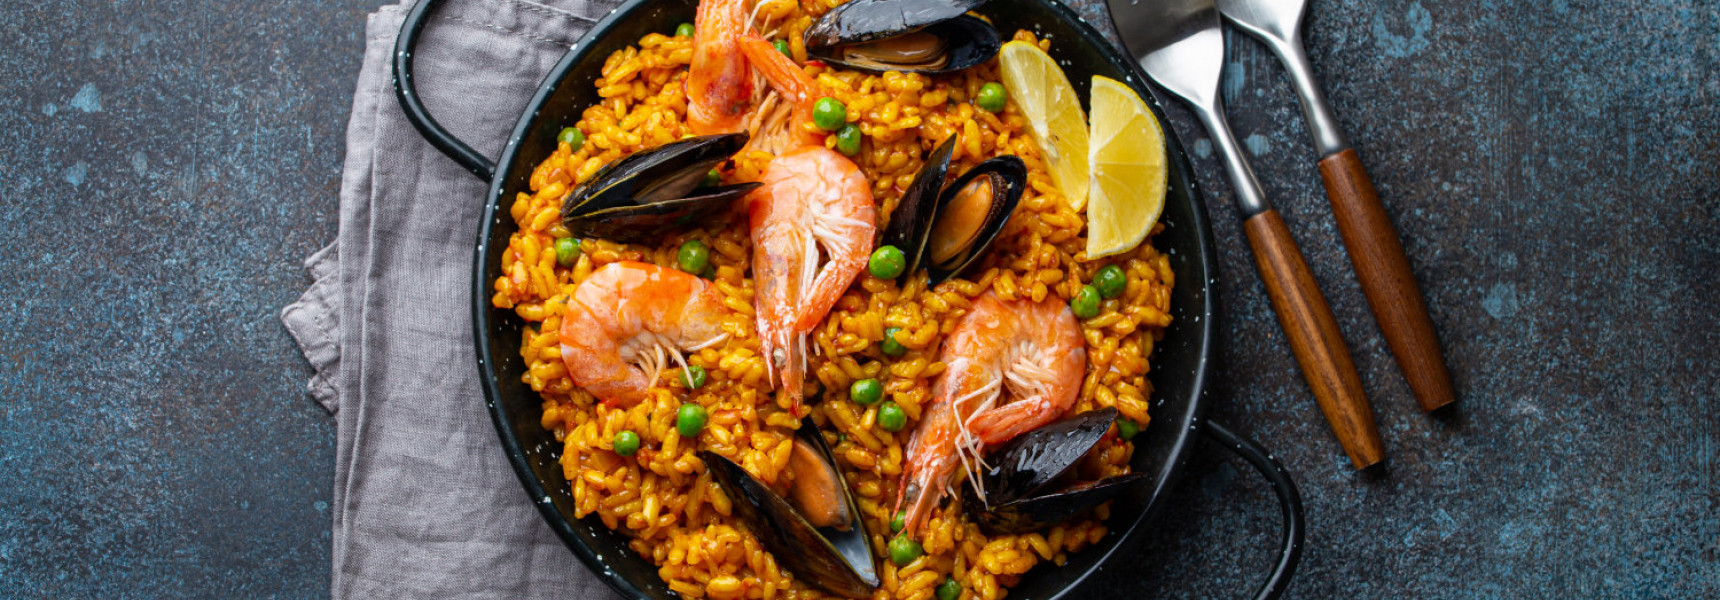 10 Foods to try in Barcelona Other Than Paella